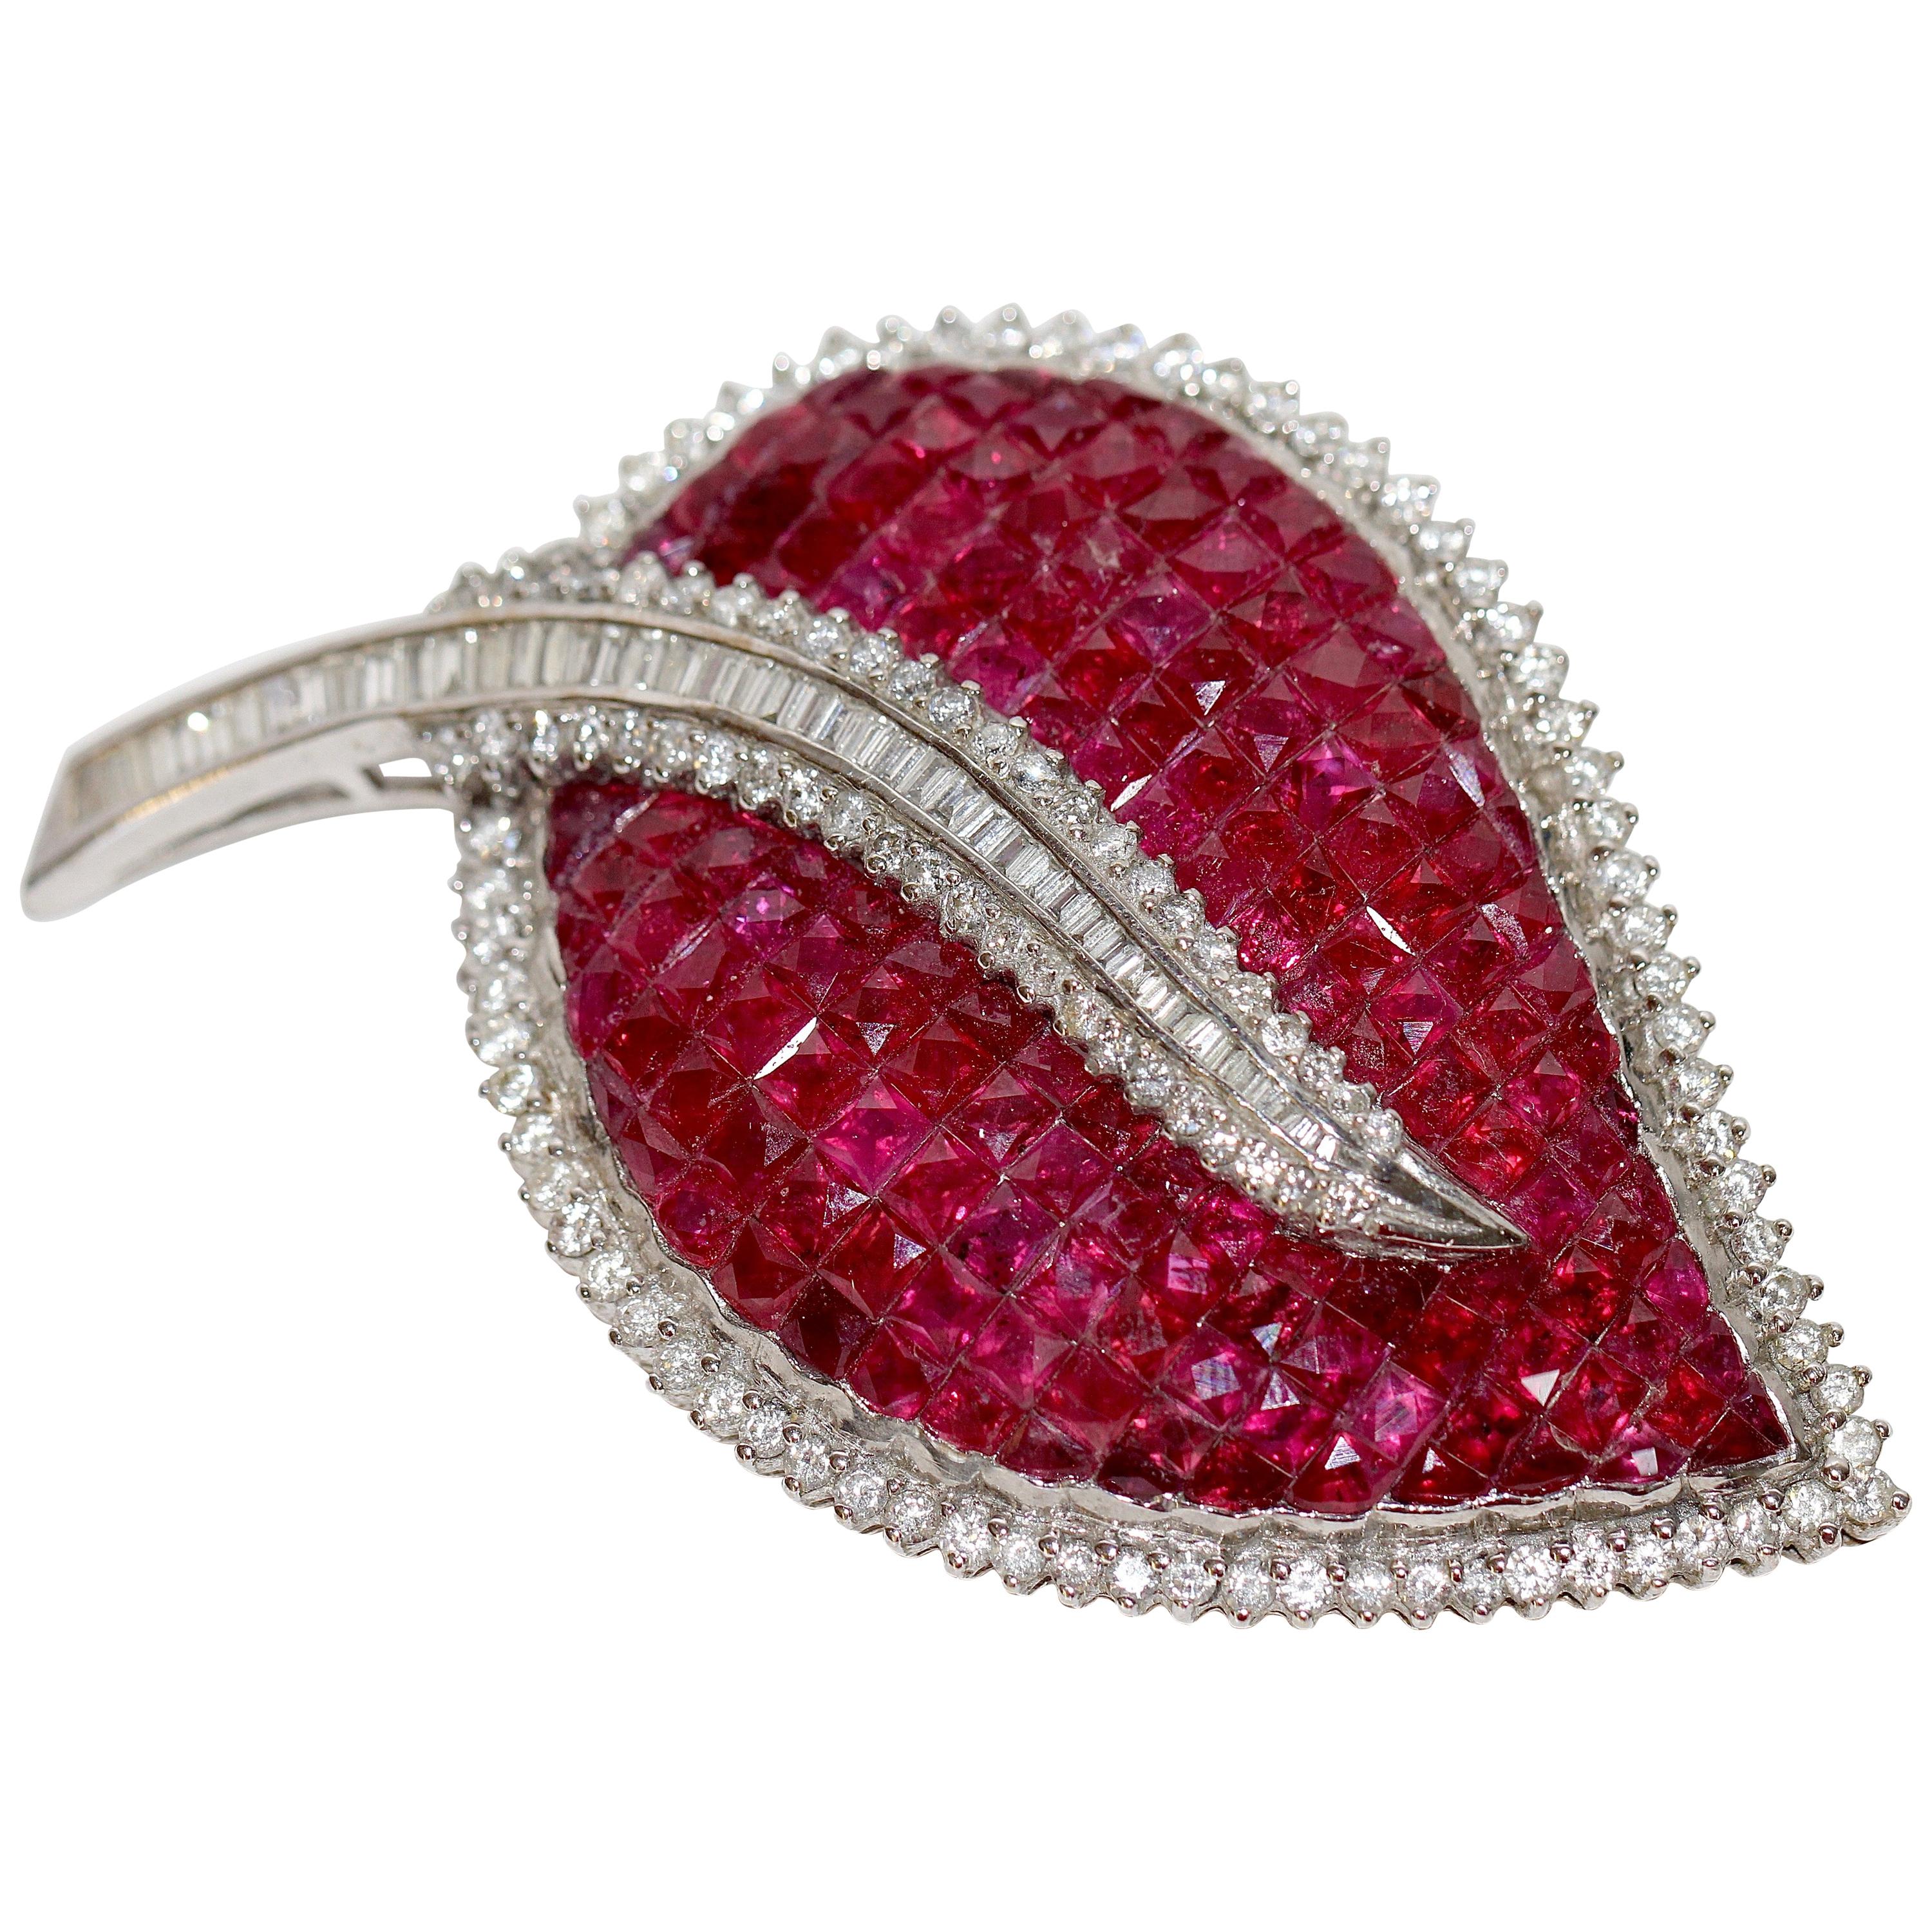 Large 18 Karat White Gold Brooch Pendant Set with Countless Rubies and Diamonds